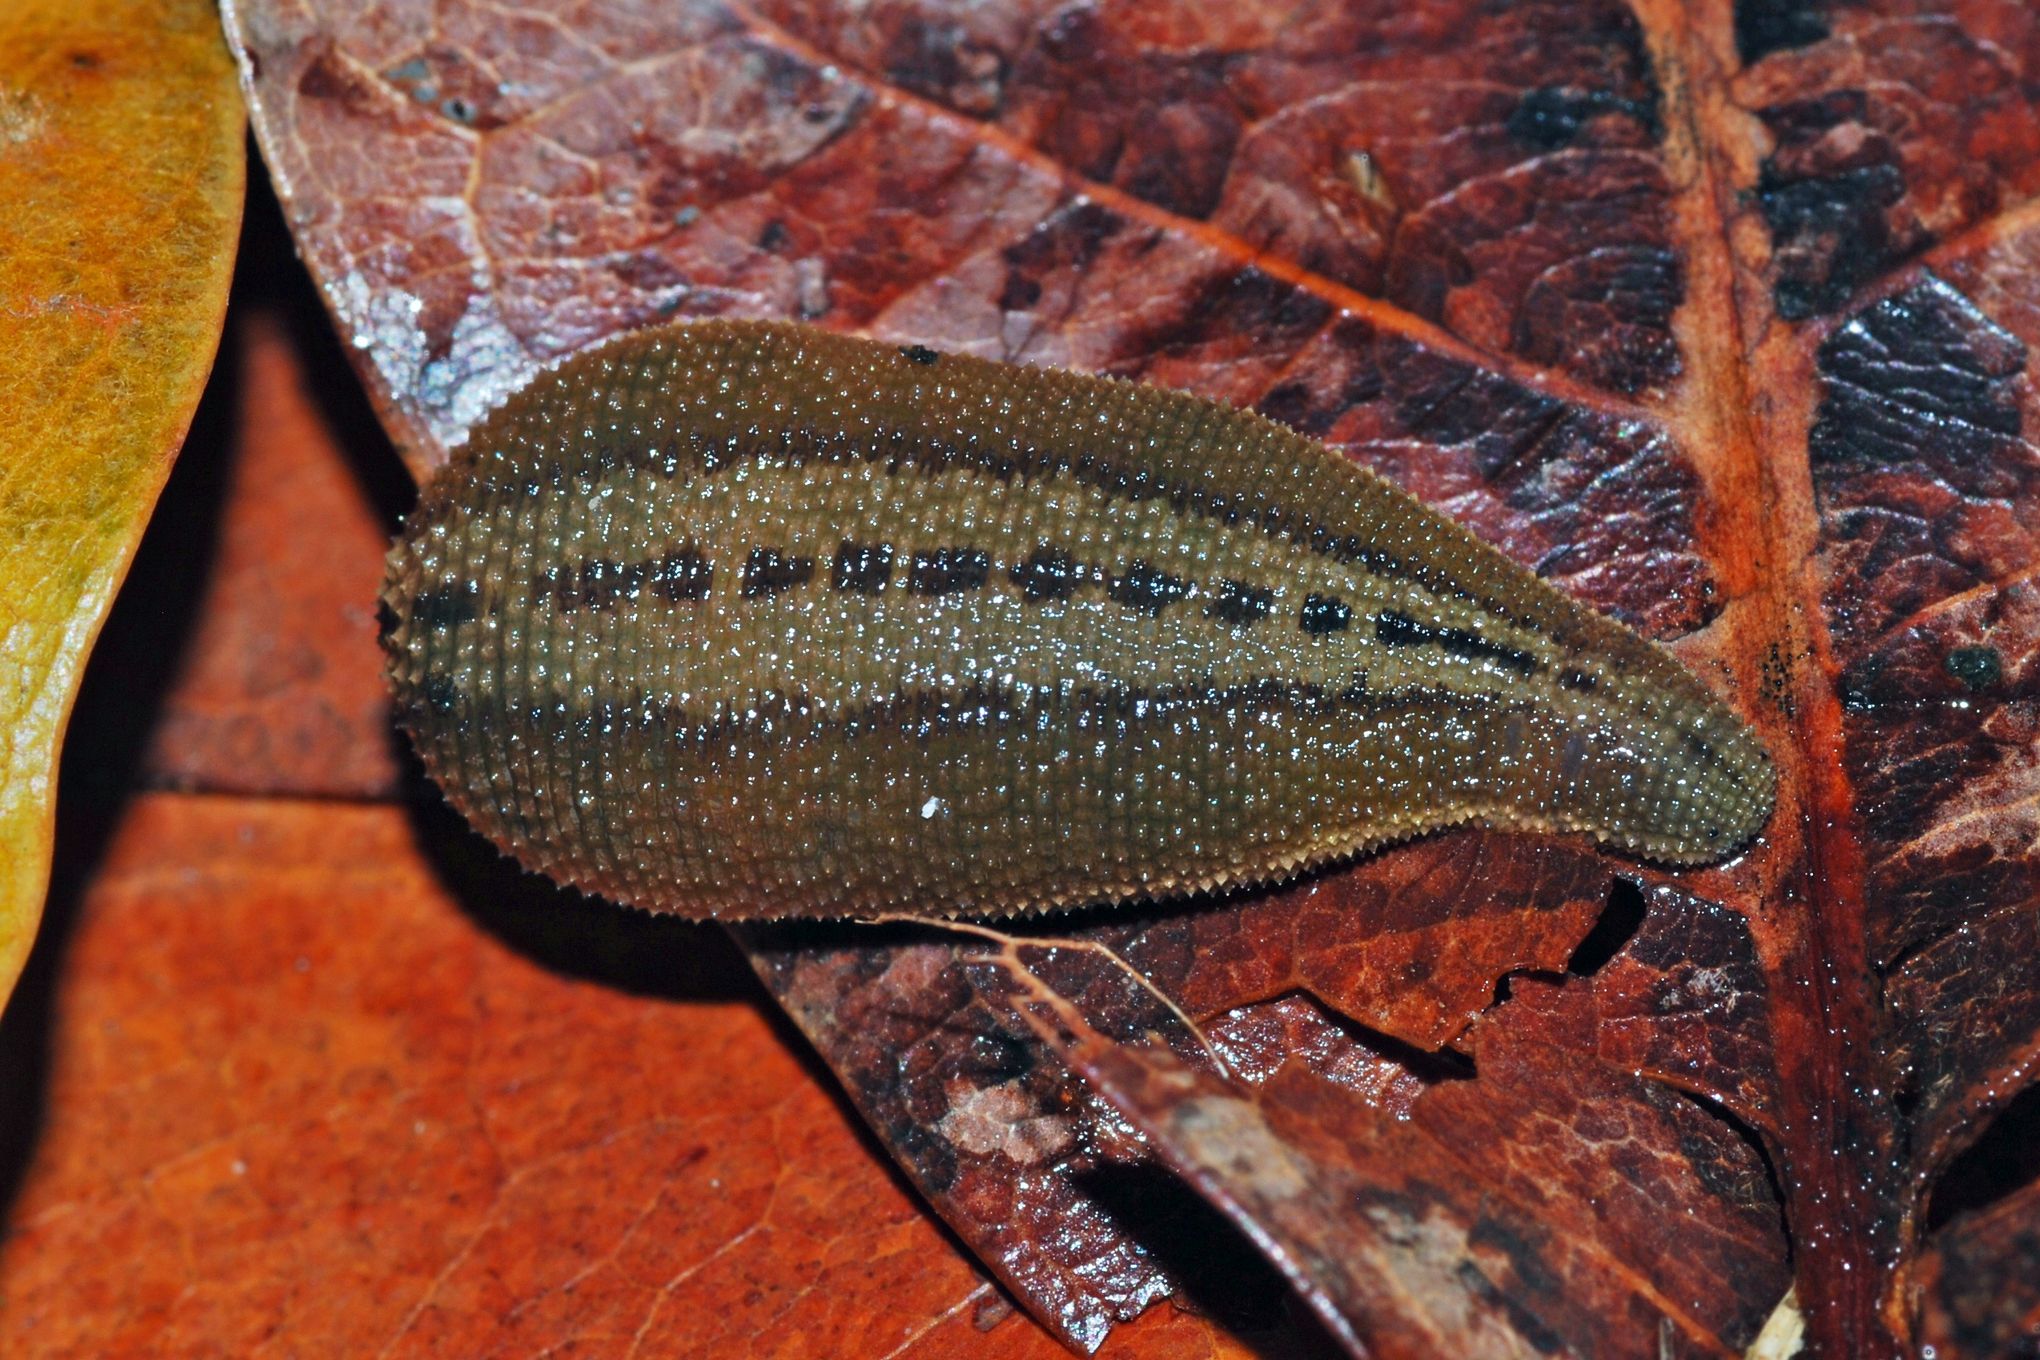 New species of blood-sucking leech discovered in DC-area